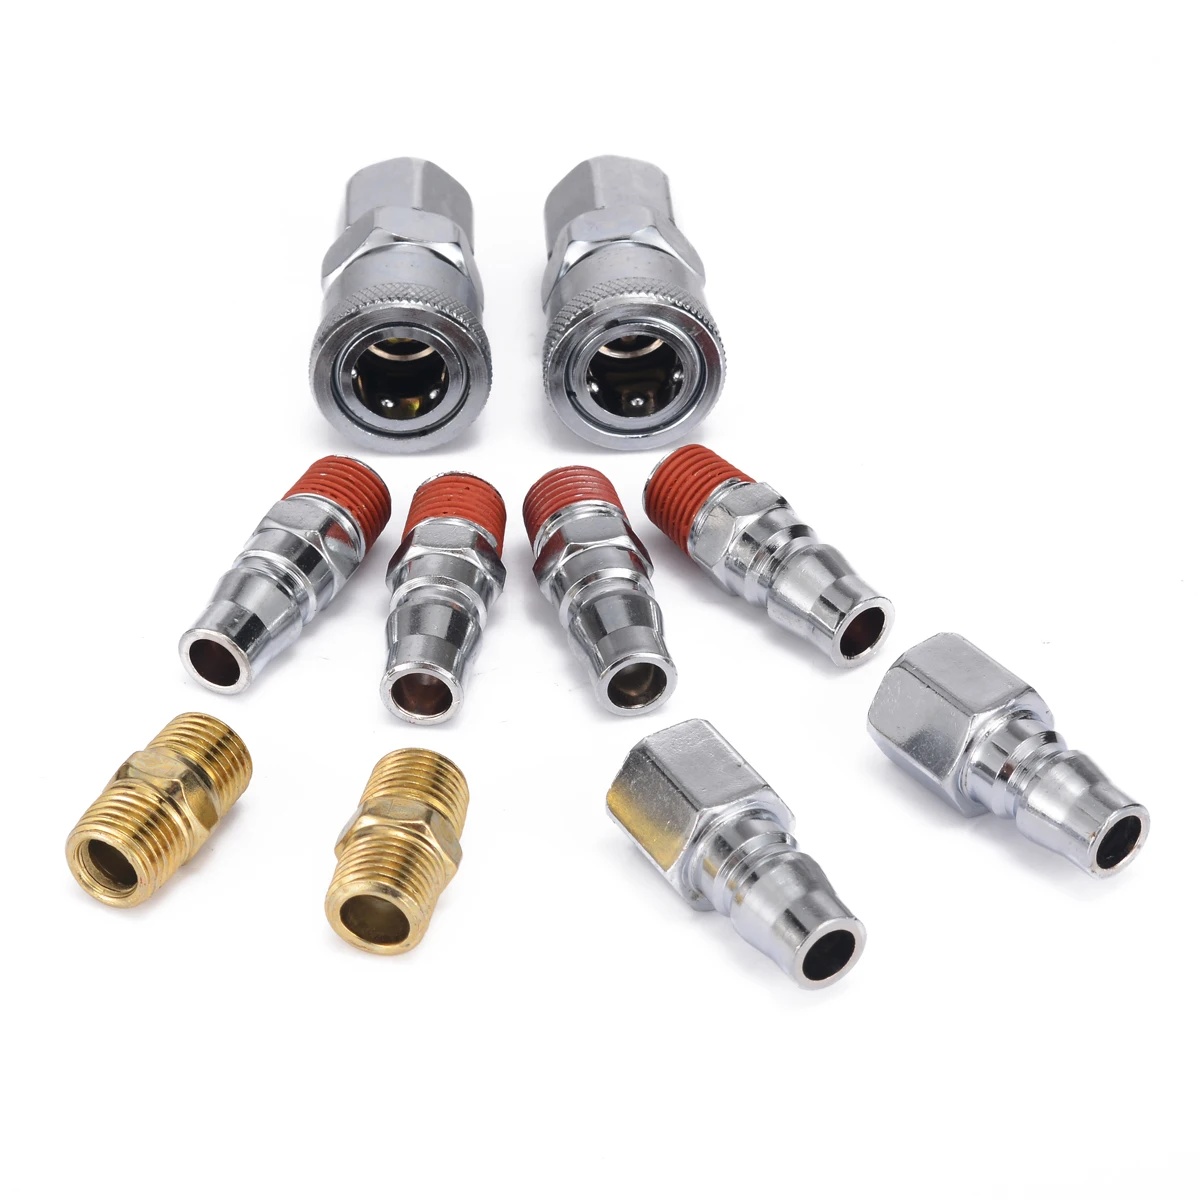 Quick Connect Air Hose Fitting Stainless Steel Air Chief Industrial Interchange High Flow Safety Air Plug 10PCS 1/4 NPT M Style Plugs 